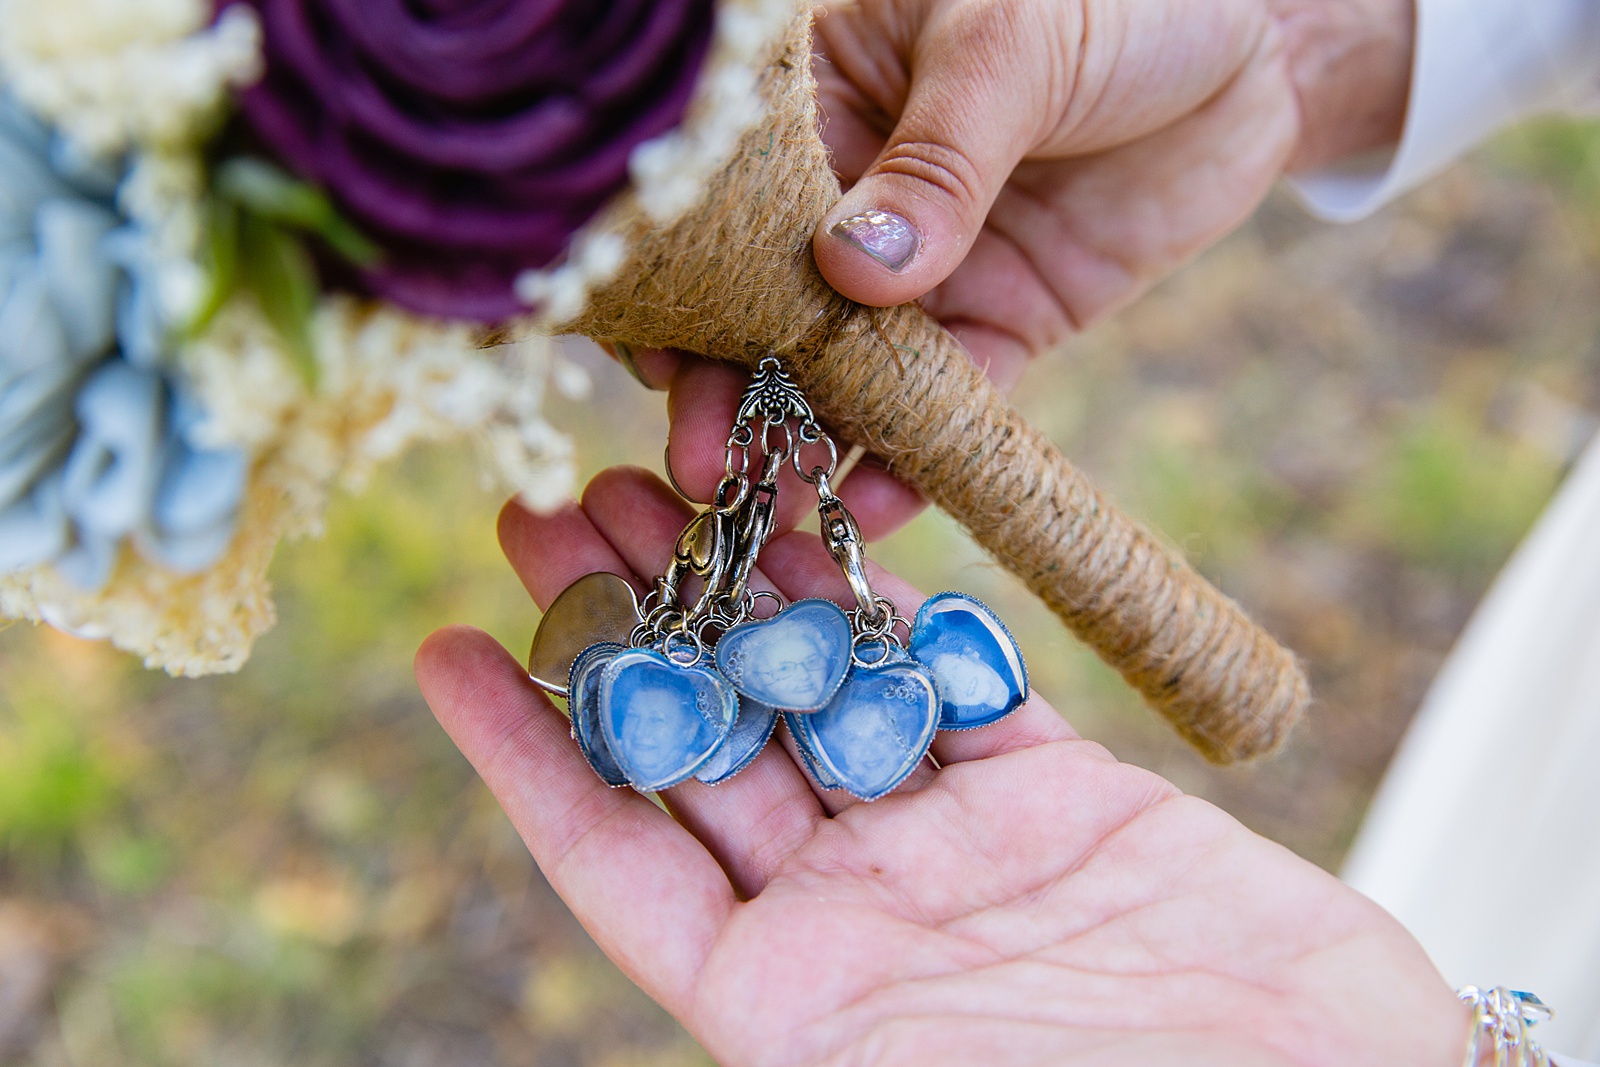 Charms of loved ones who have passed on a bride's bouquet by PMA Photography.